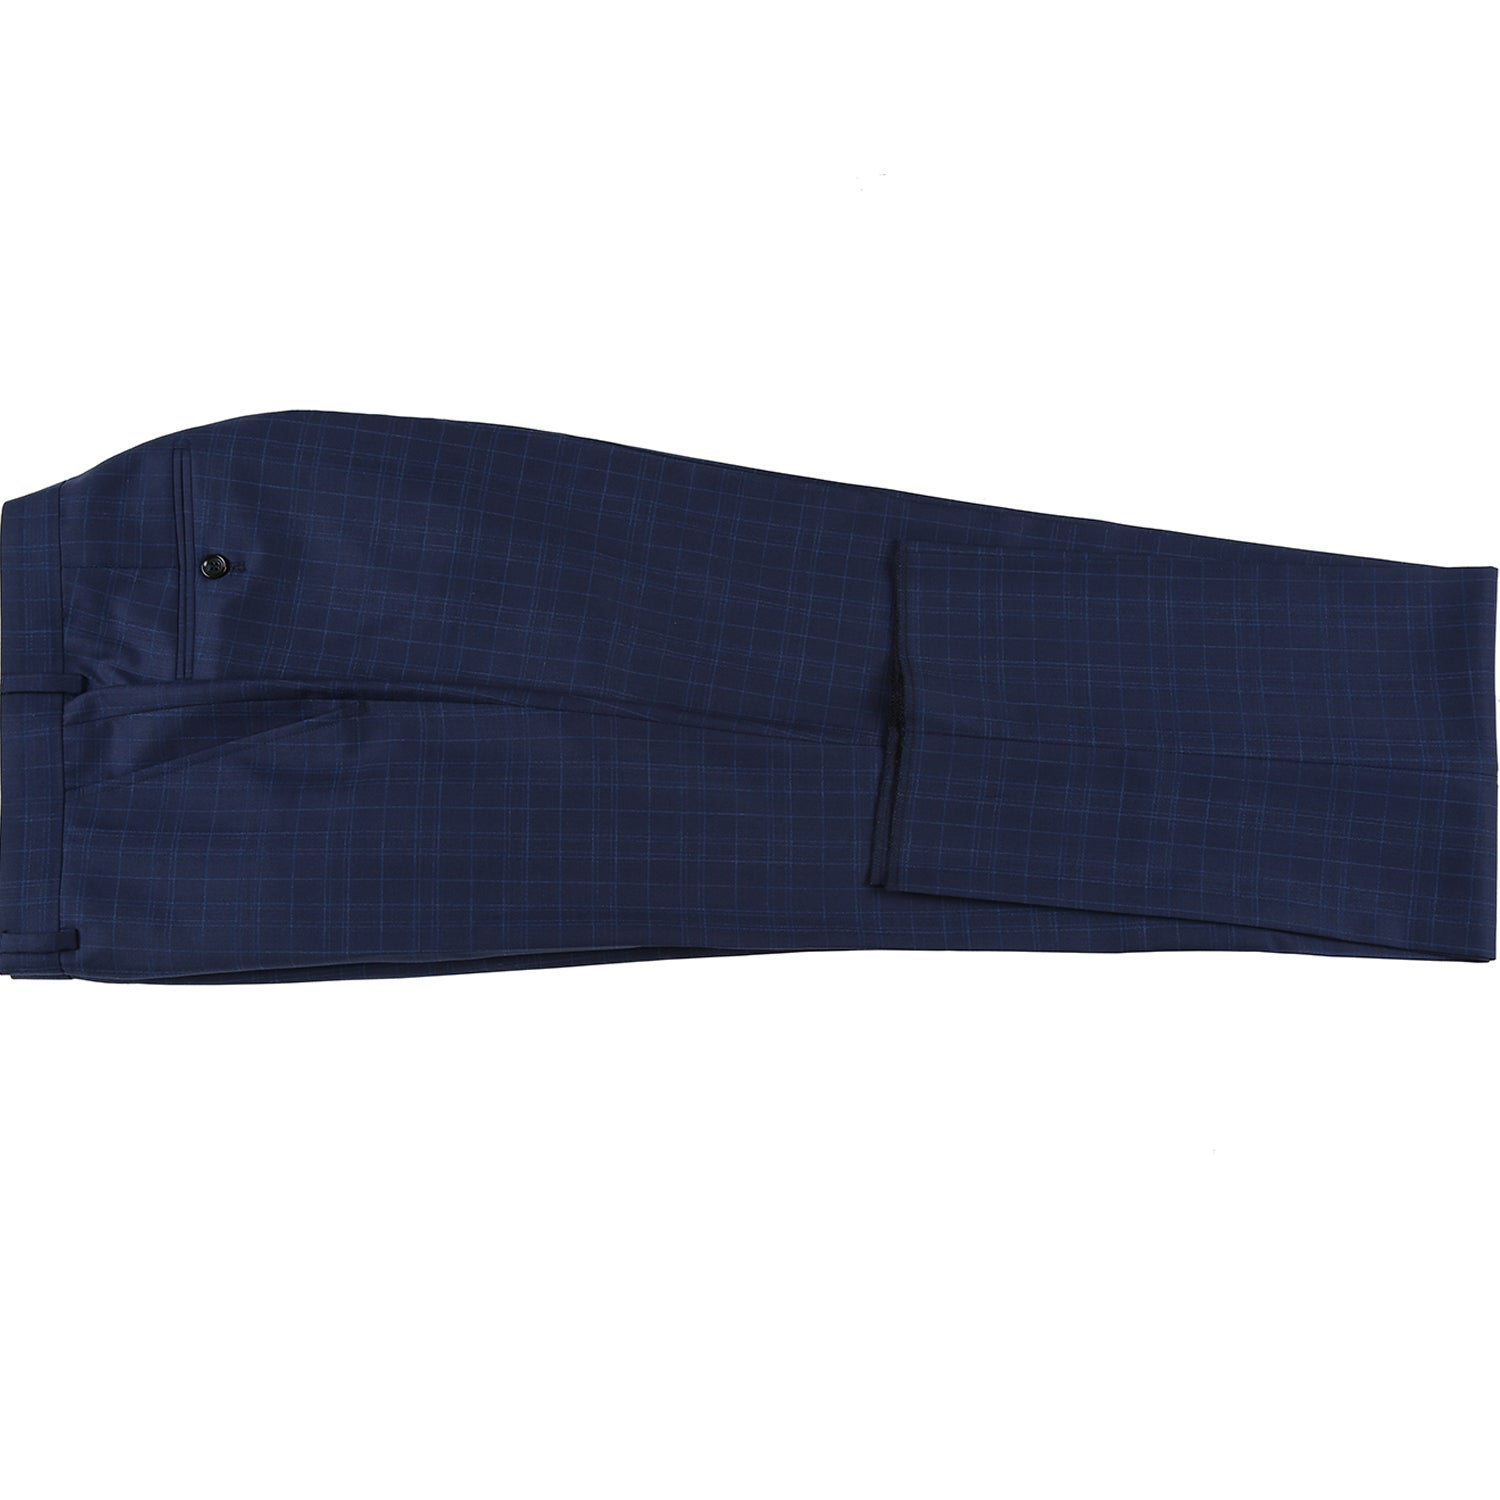 Men’s Single Breasted Notch Lapels Navy Check Suits 6